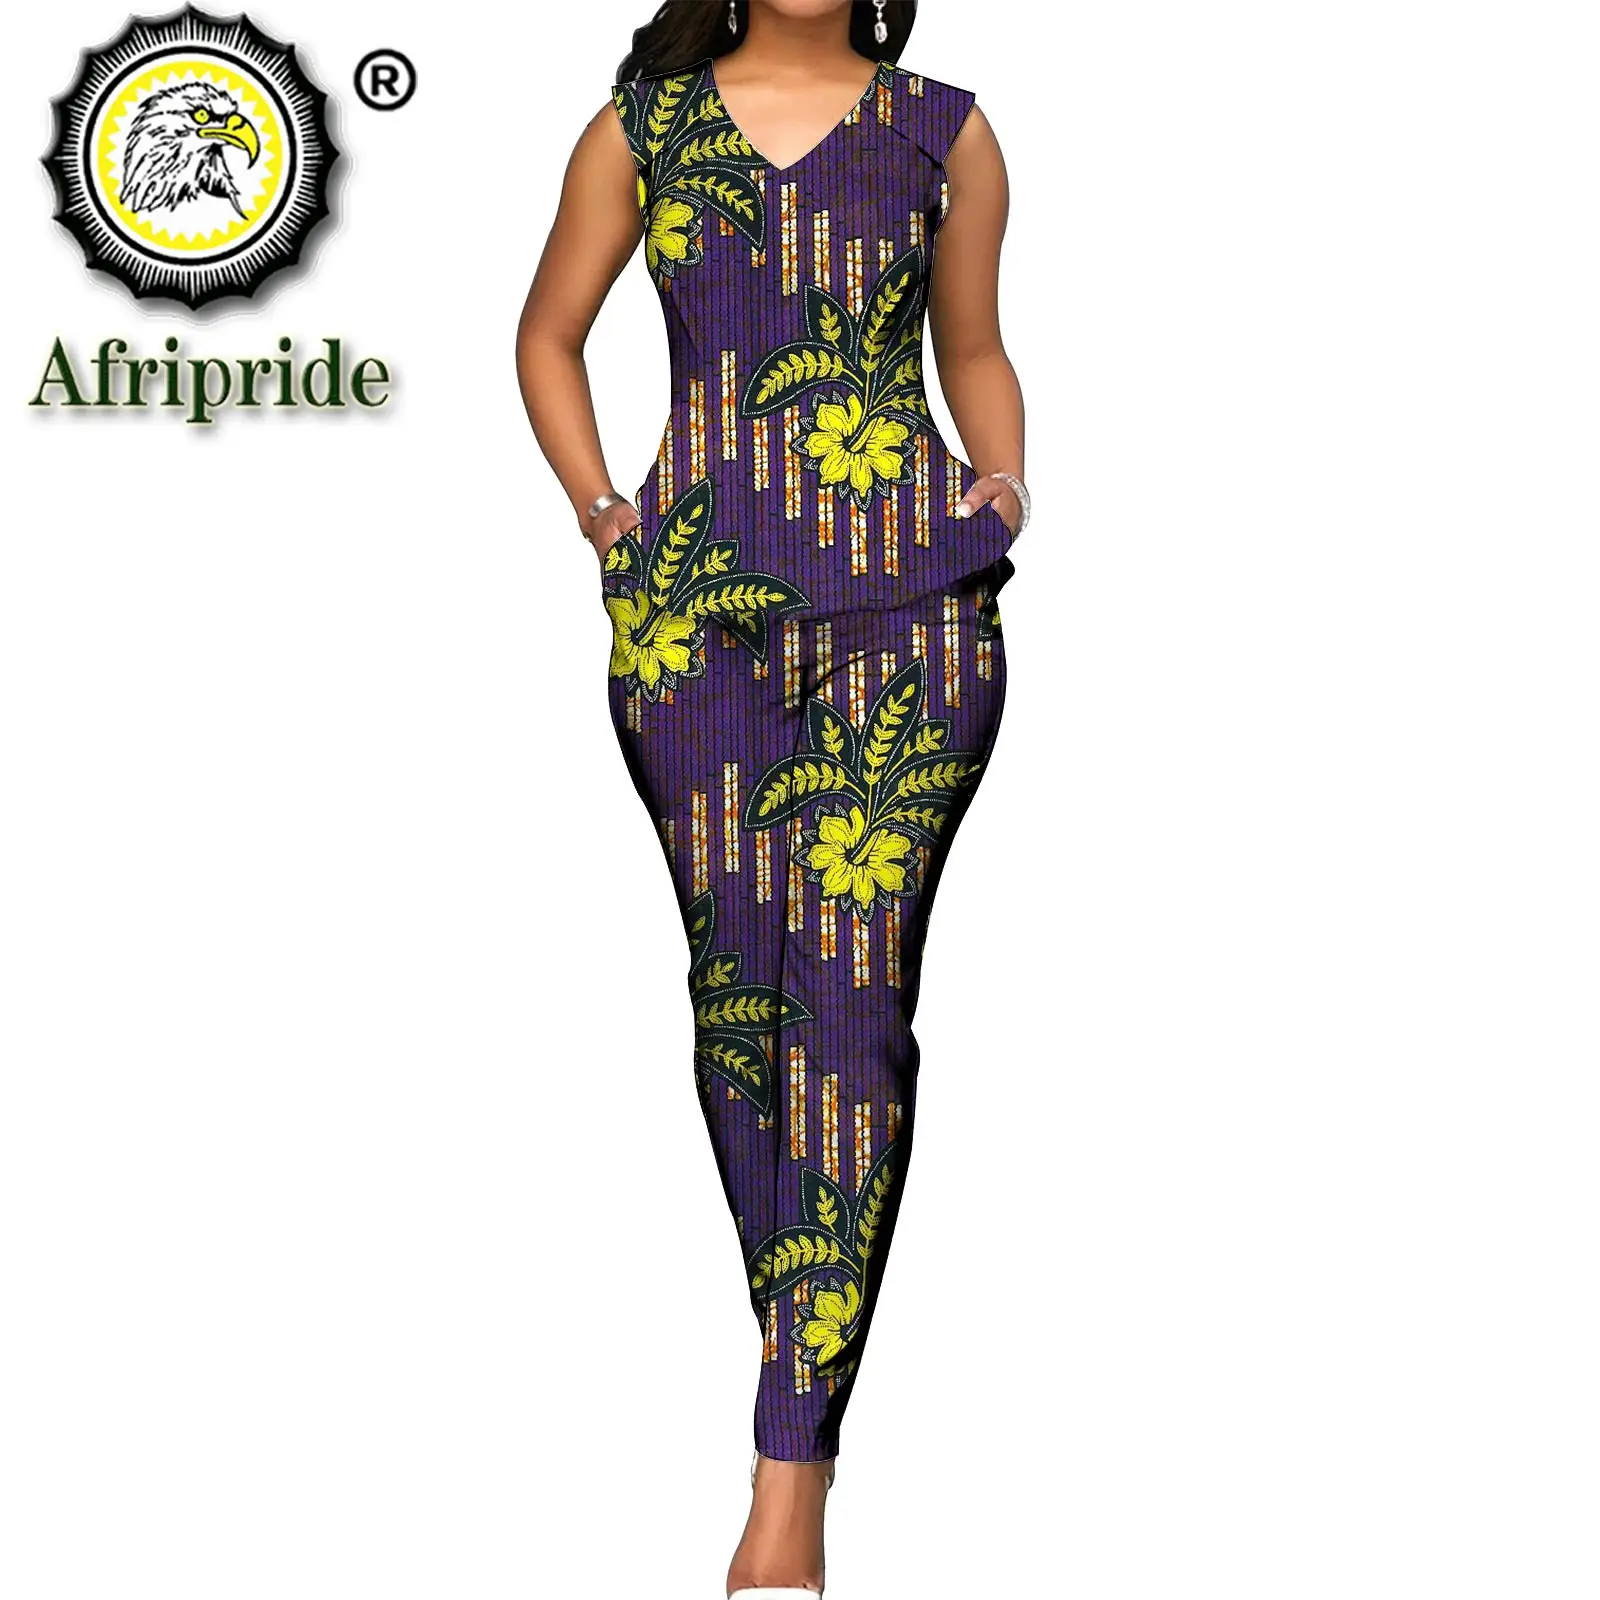 2022 Women`s 2 Piece Set Dashiki Tops Blouse+ Ankara Pants African Print Outfit Sleeveless V Neck Casual Wear AFRIPRIDE S1926031